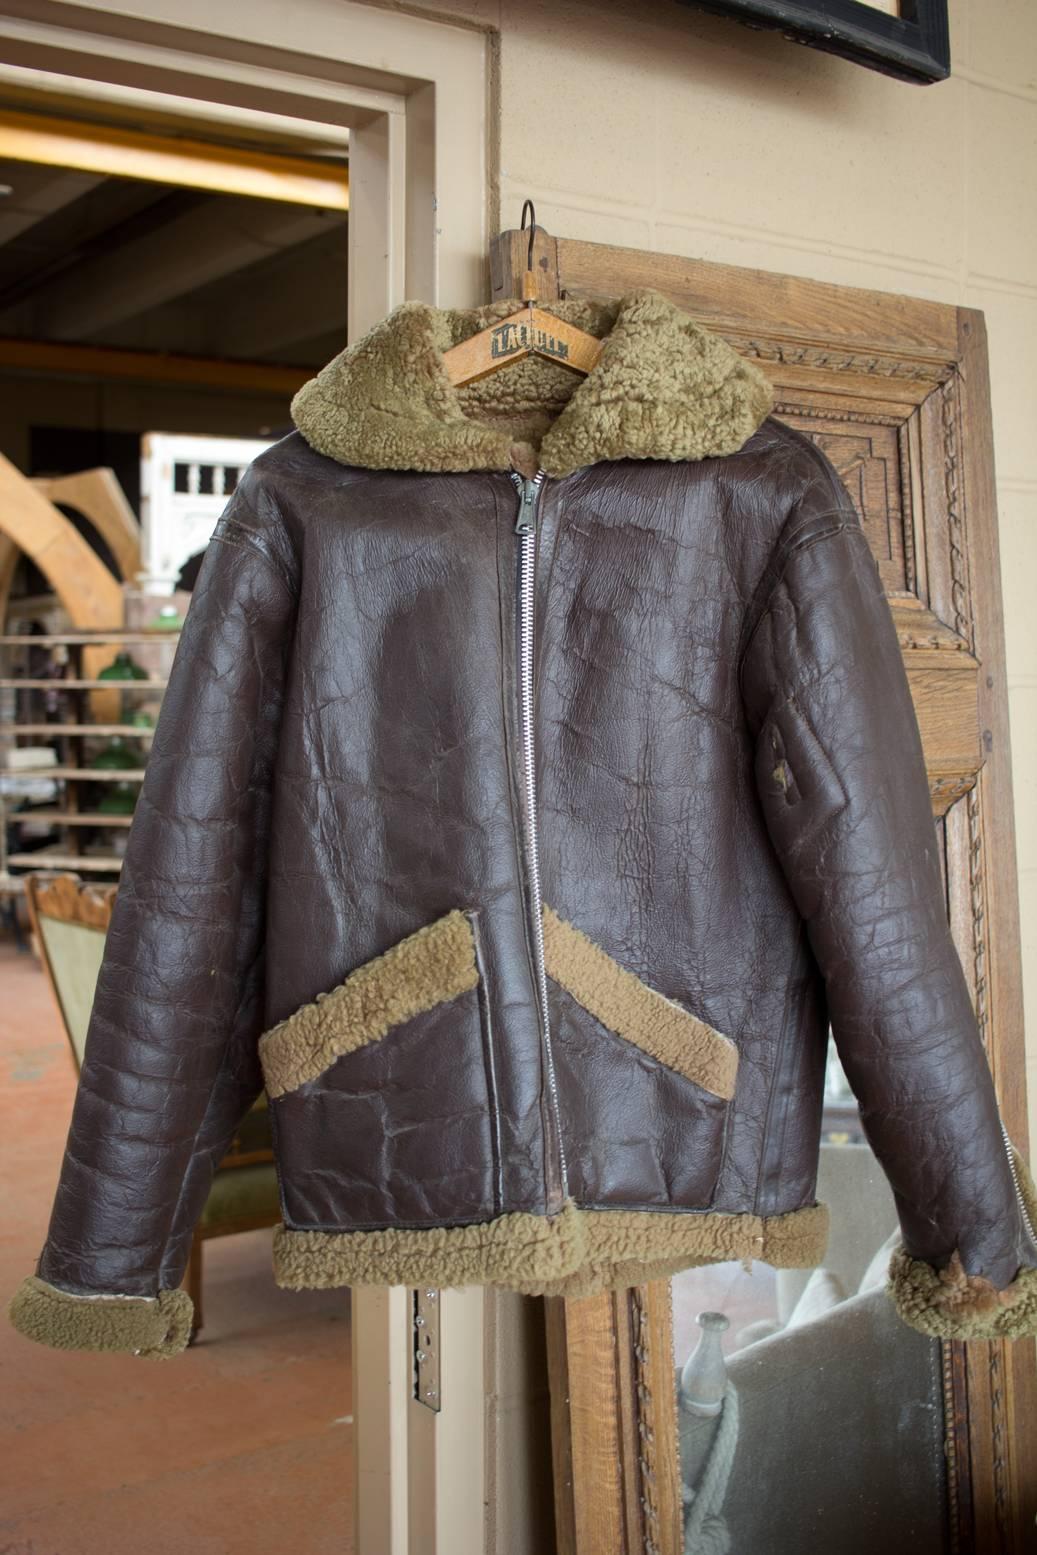 WWII British aviator Spitfire leather jacket with lambs wool lining. Zippers in full functioning order. Good original piece of second world war memorabilia.

Arm length to top shoulder: 24.0